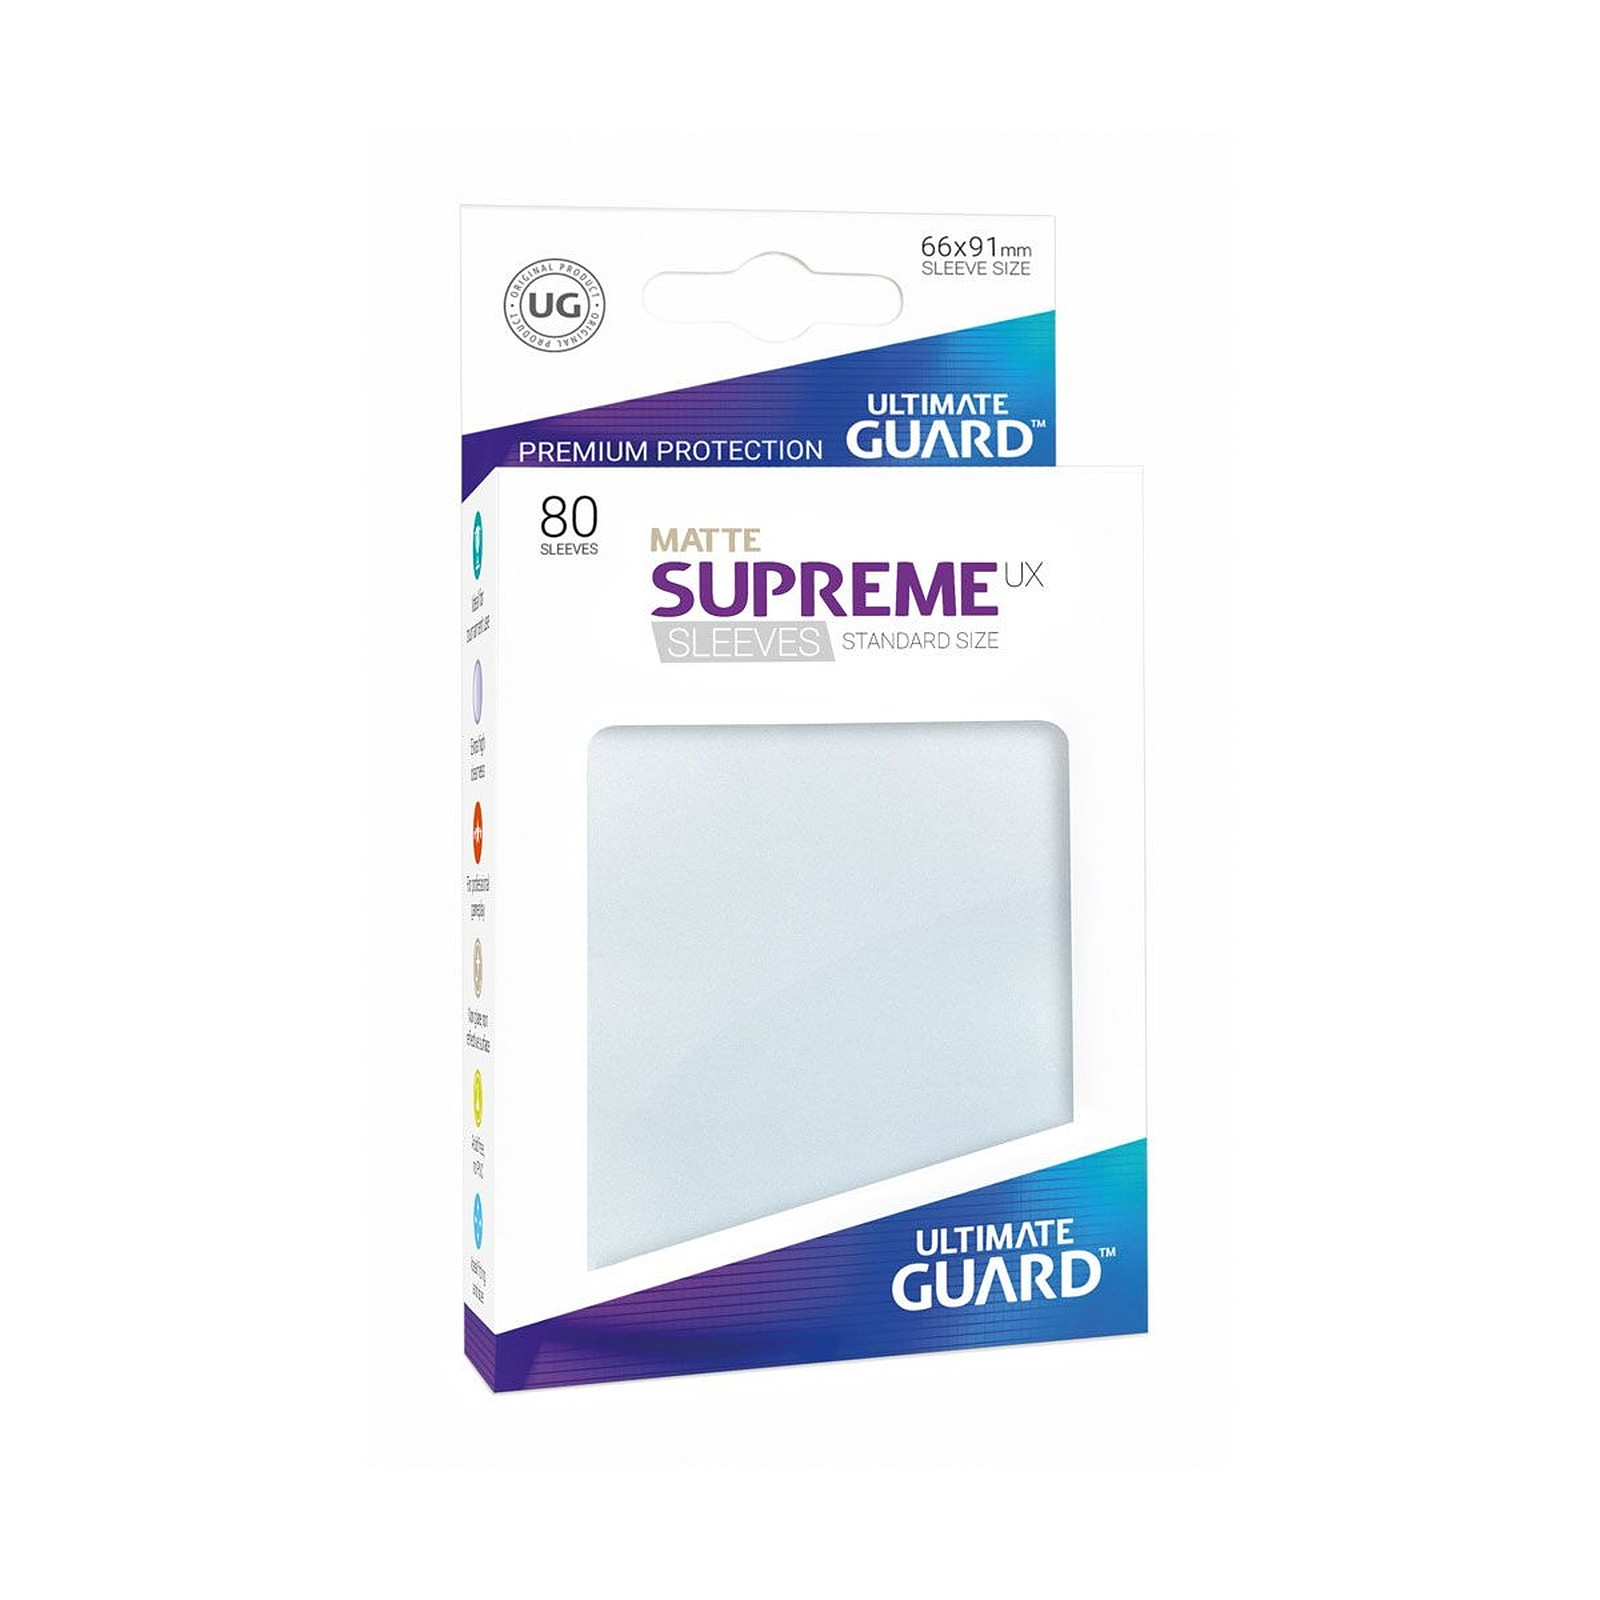 Ultimate Guard - 80 pochettes Supreme UX Sleeves taille standard Frosted Mat - Accessoire jeux Ultimate Guard